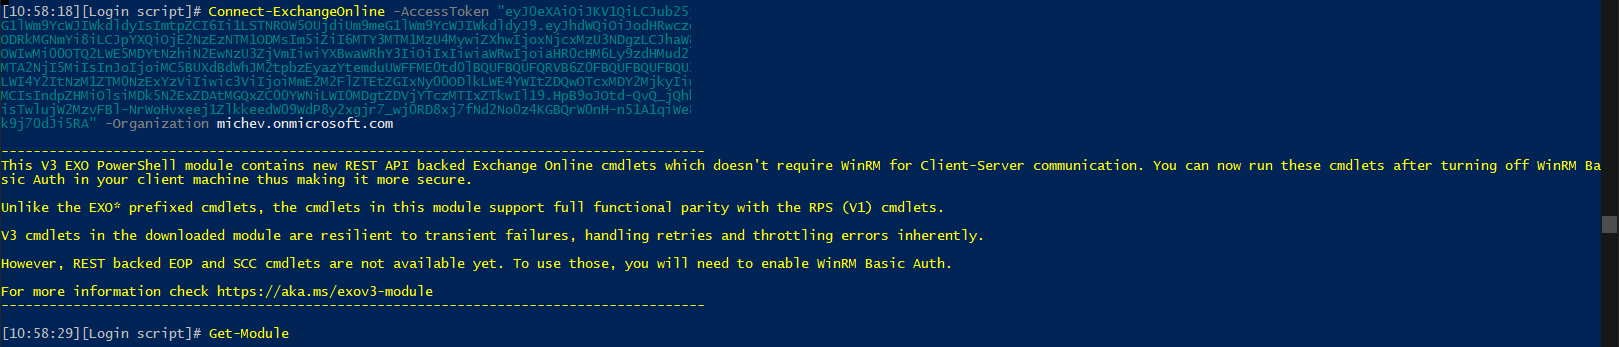 Connecting to Exchange Online PowerShell via an access token